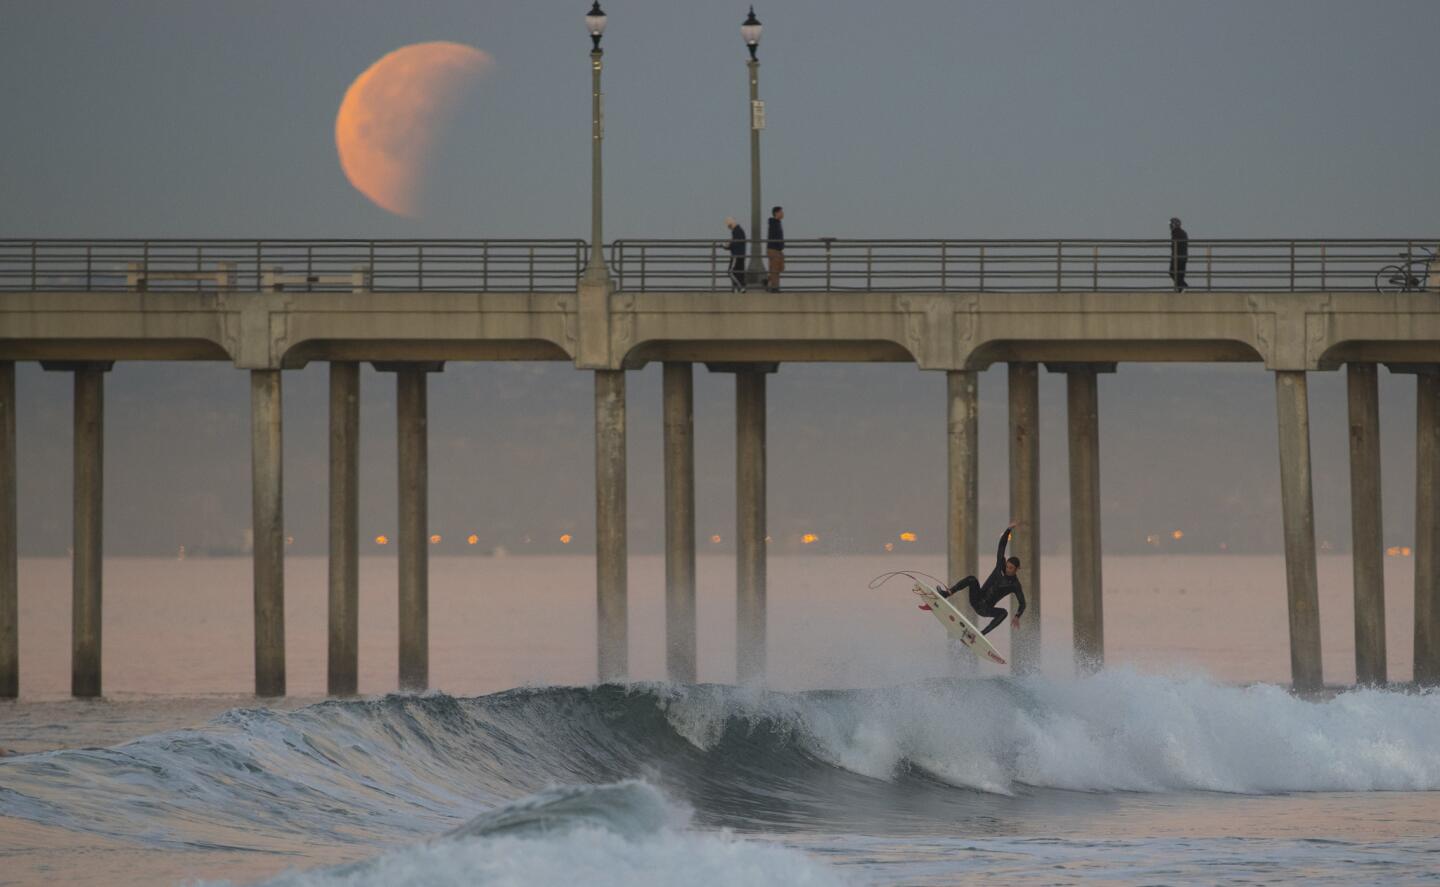 A surfer goes airborne off a wave as the super blue blood moon eclipse sets over the Huntington Beach pier.